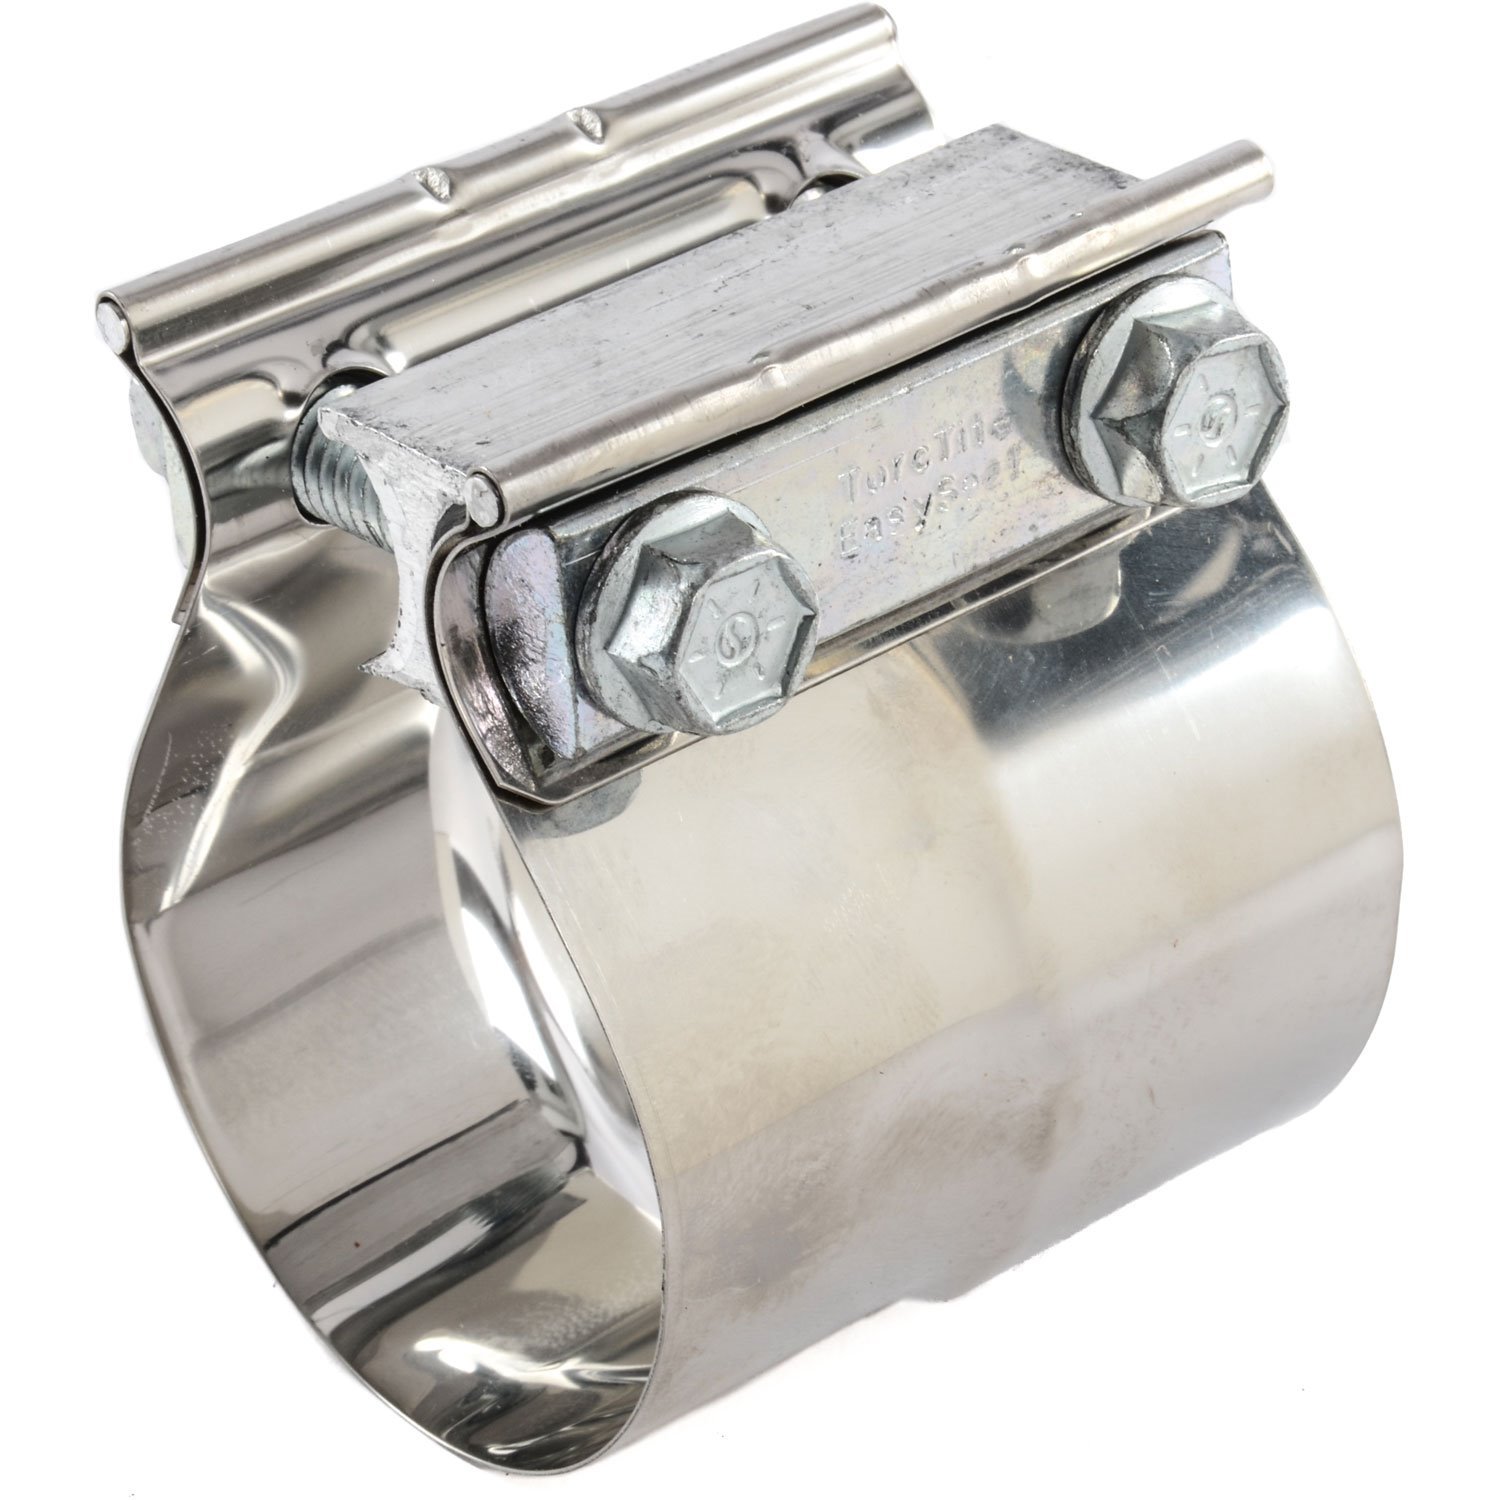 Preformed Exhaust Lap Joint Band Clamp for I.D. O.D. Slip Fit Connection [Fits 2 1/2 in. O.D. Pipe]